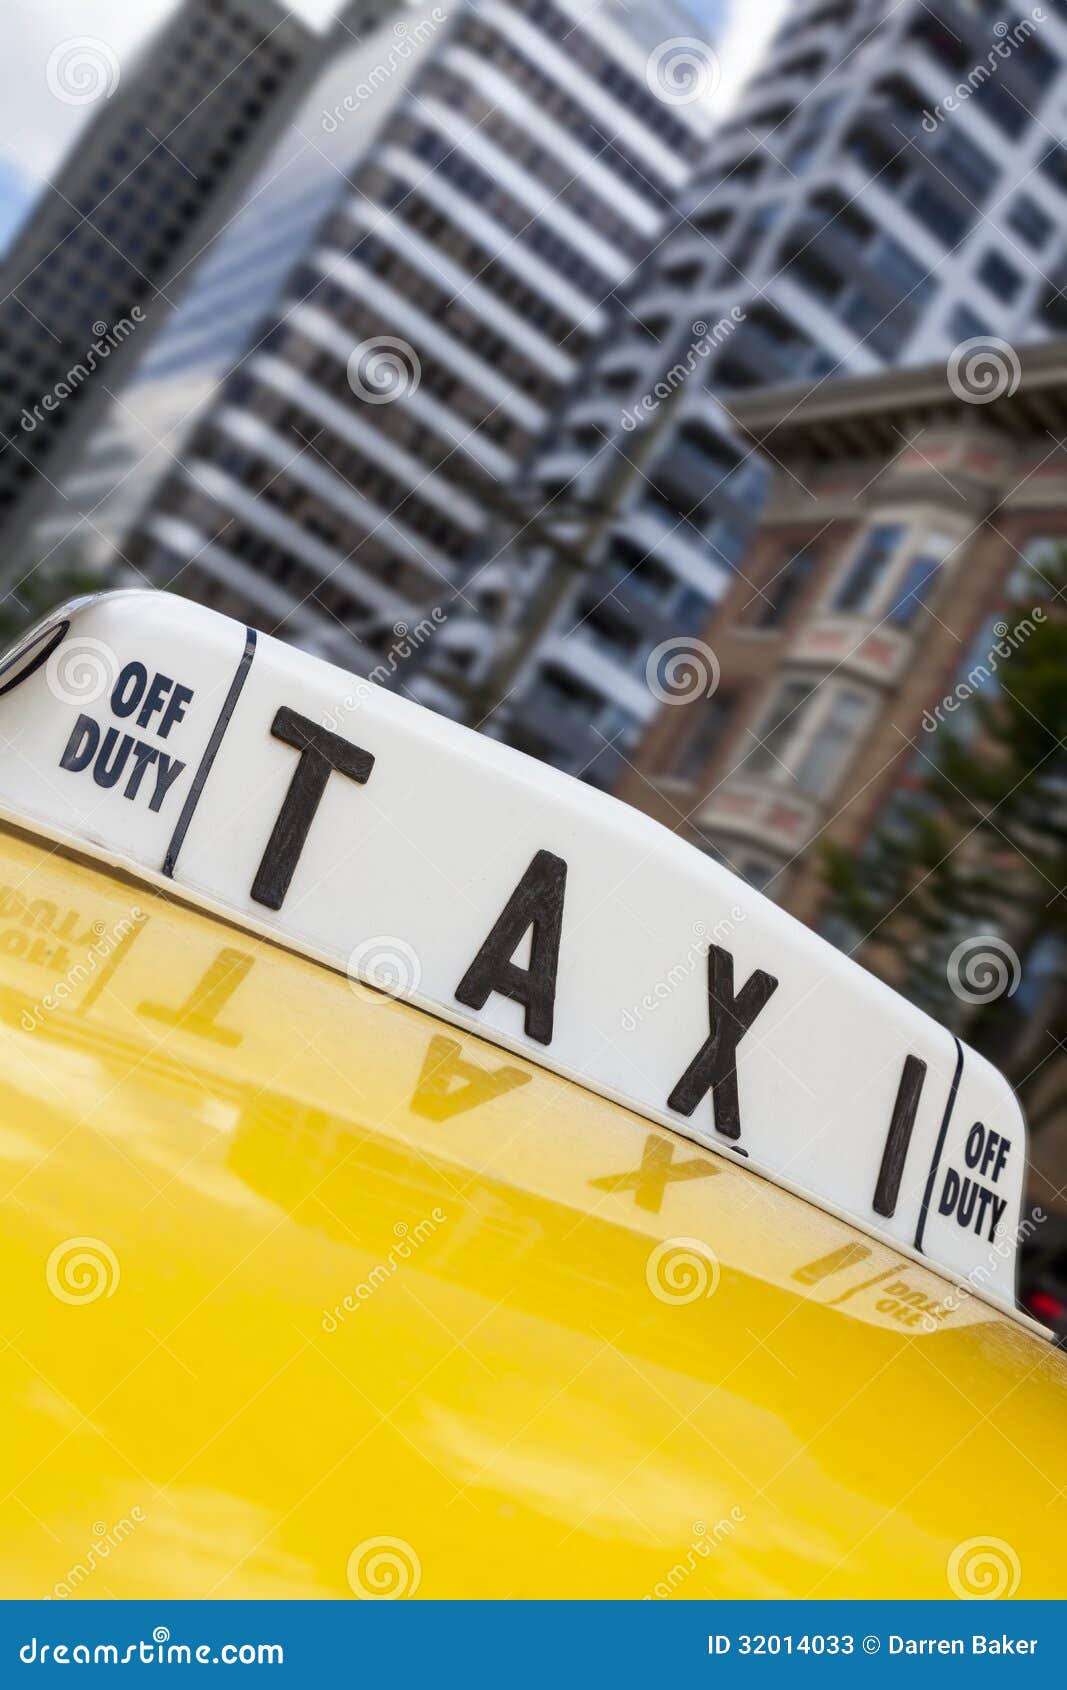 new york city yellow taxi cab